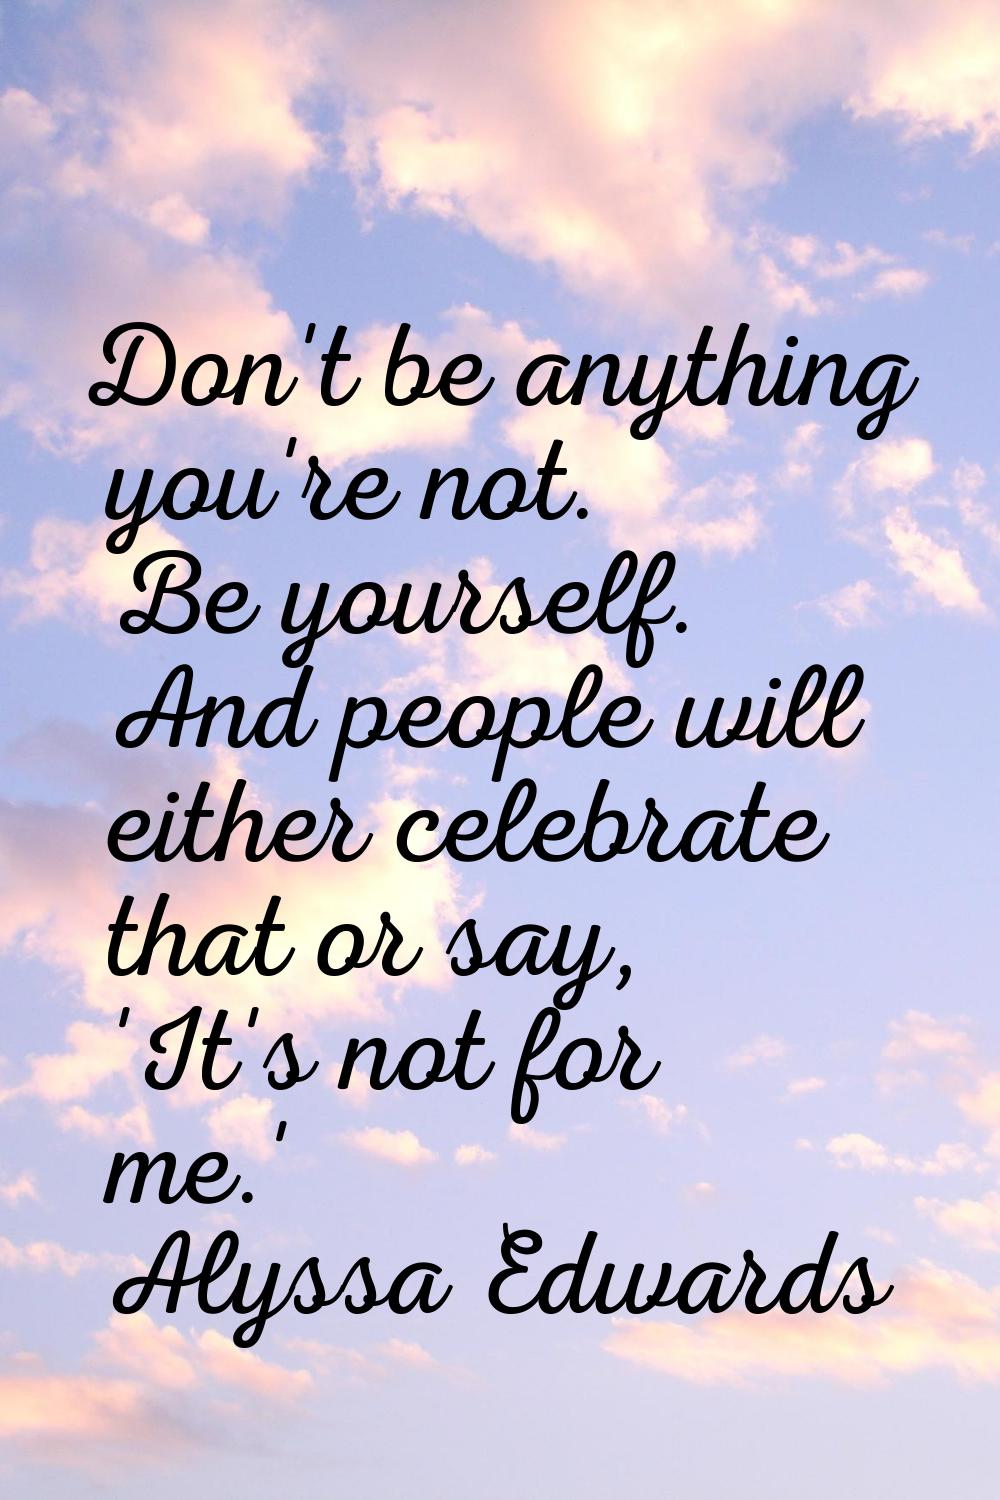 Don't be anything you're not. Be yourself. And people will either celebrate that or say, 'It's not 